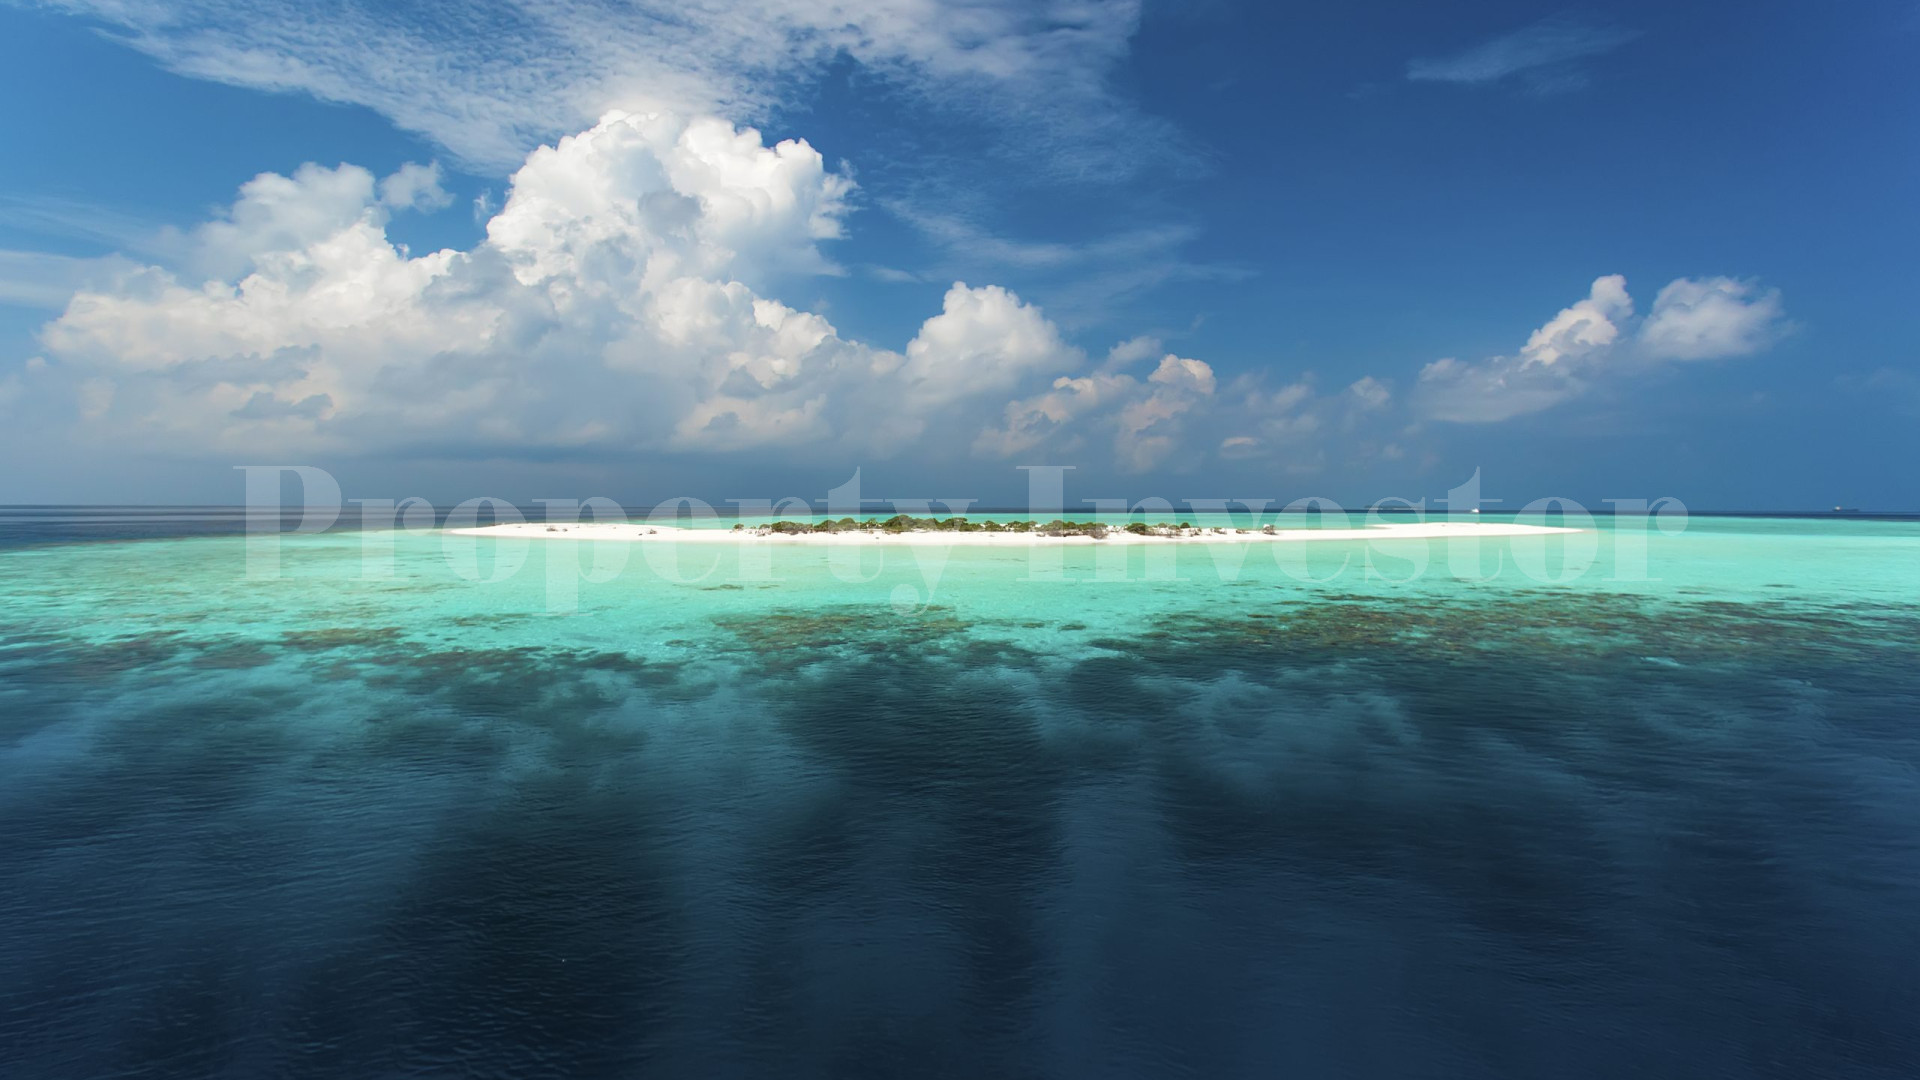 Exclusive 32 Room Island Eco Resort with 89 Room Overwater Bungalow Expansion Plan for Sale in the Maldives